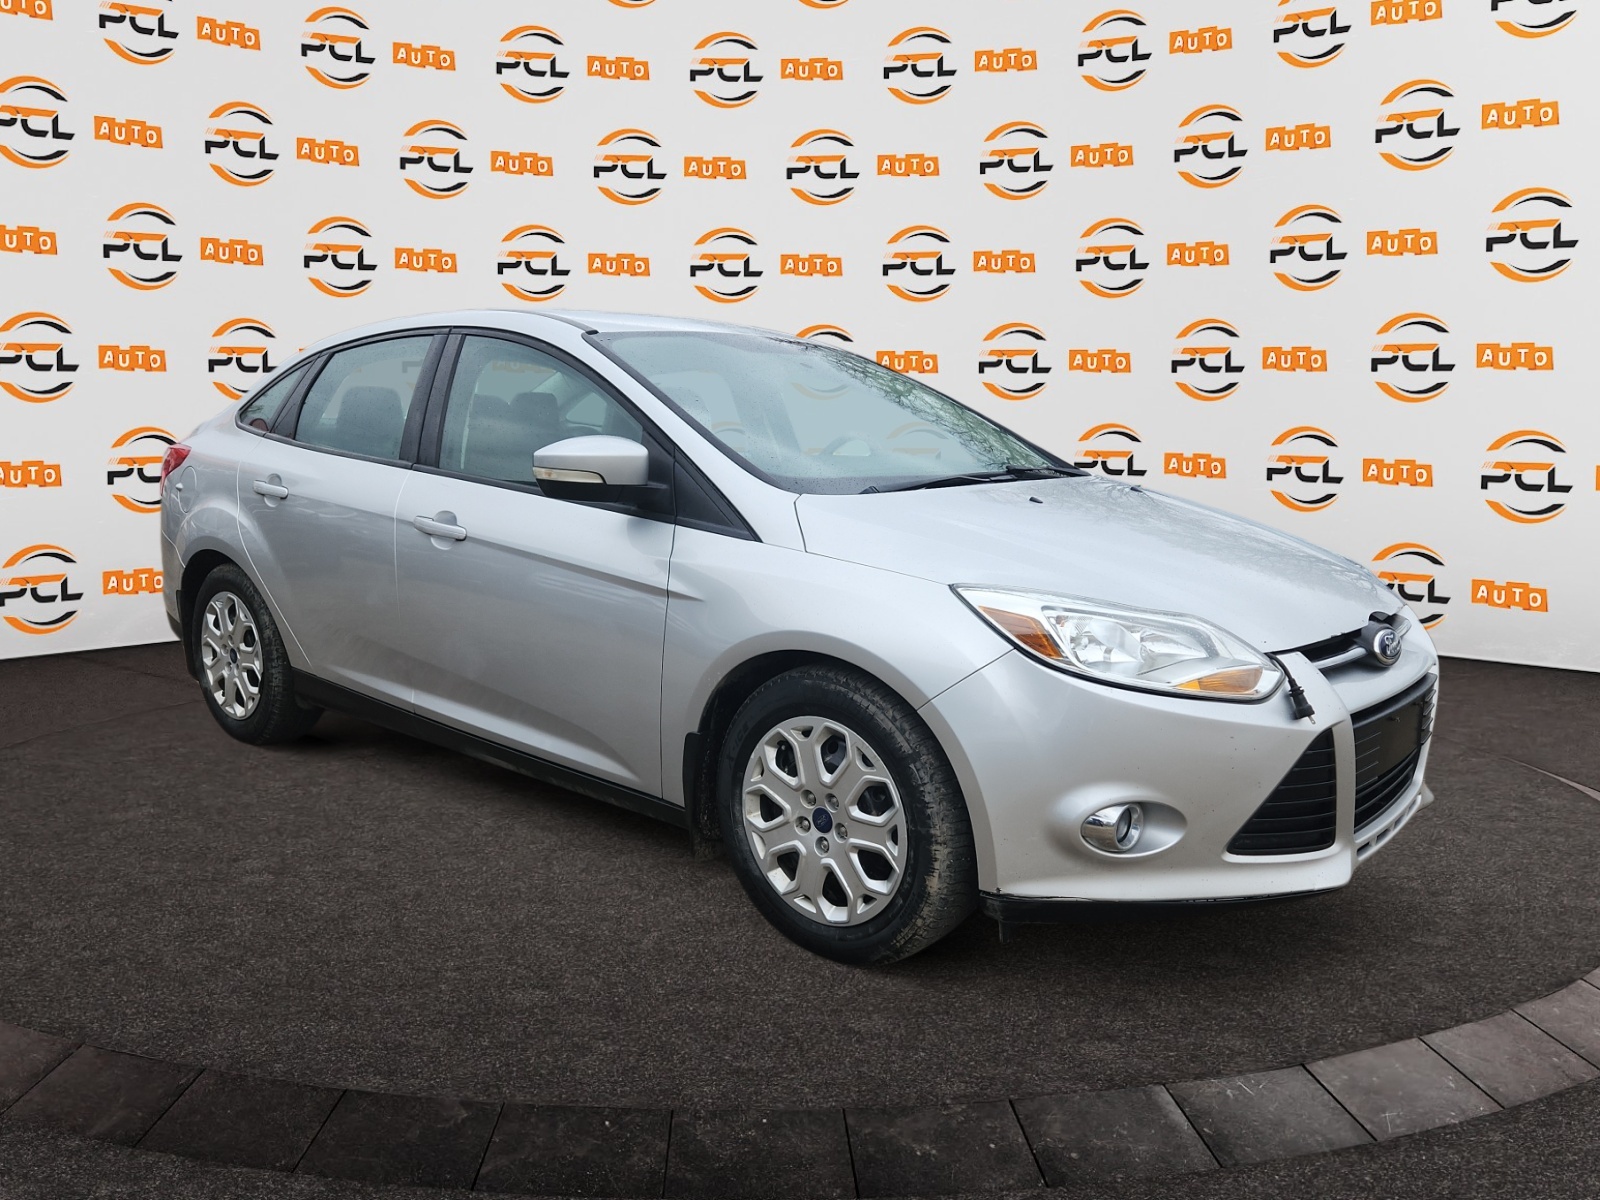 2012 Ford Focus 4dr Sdn SE